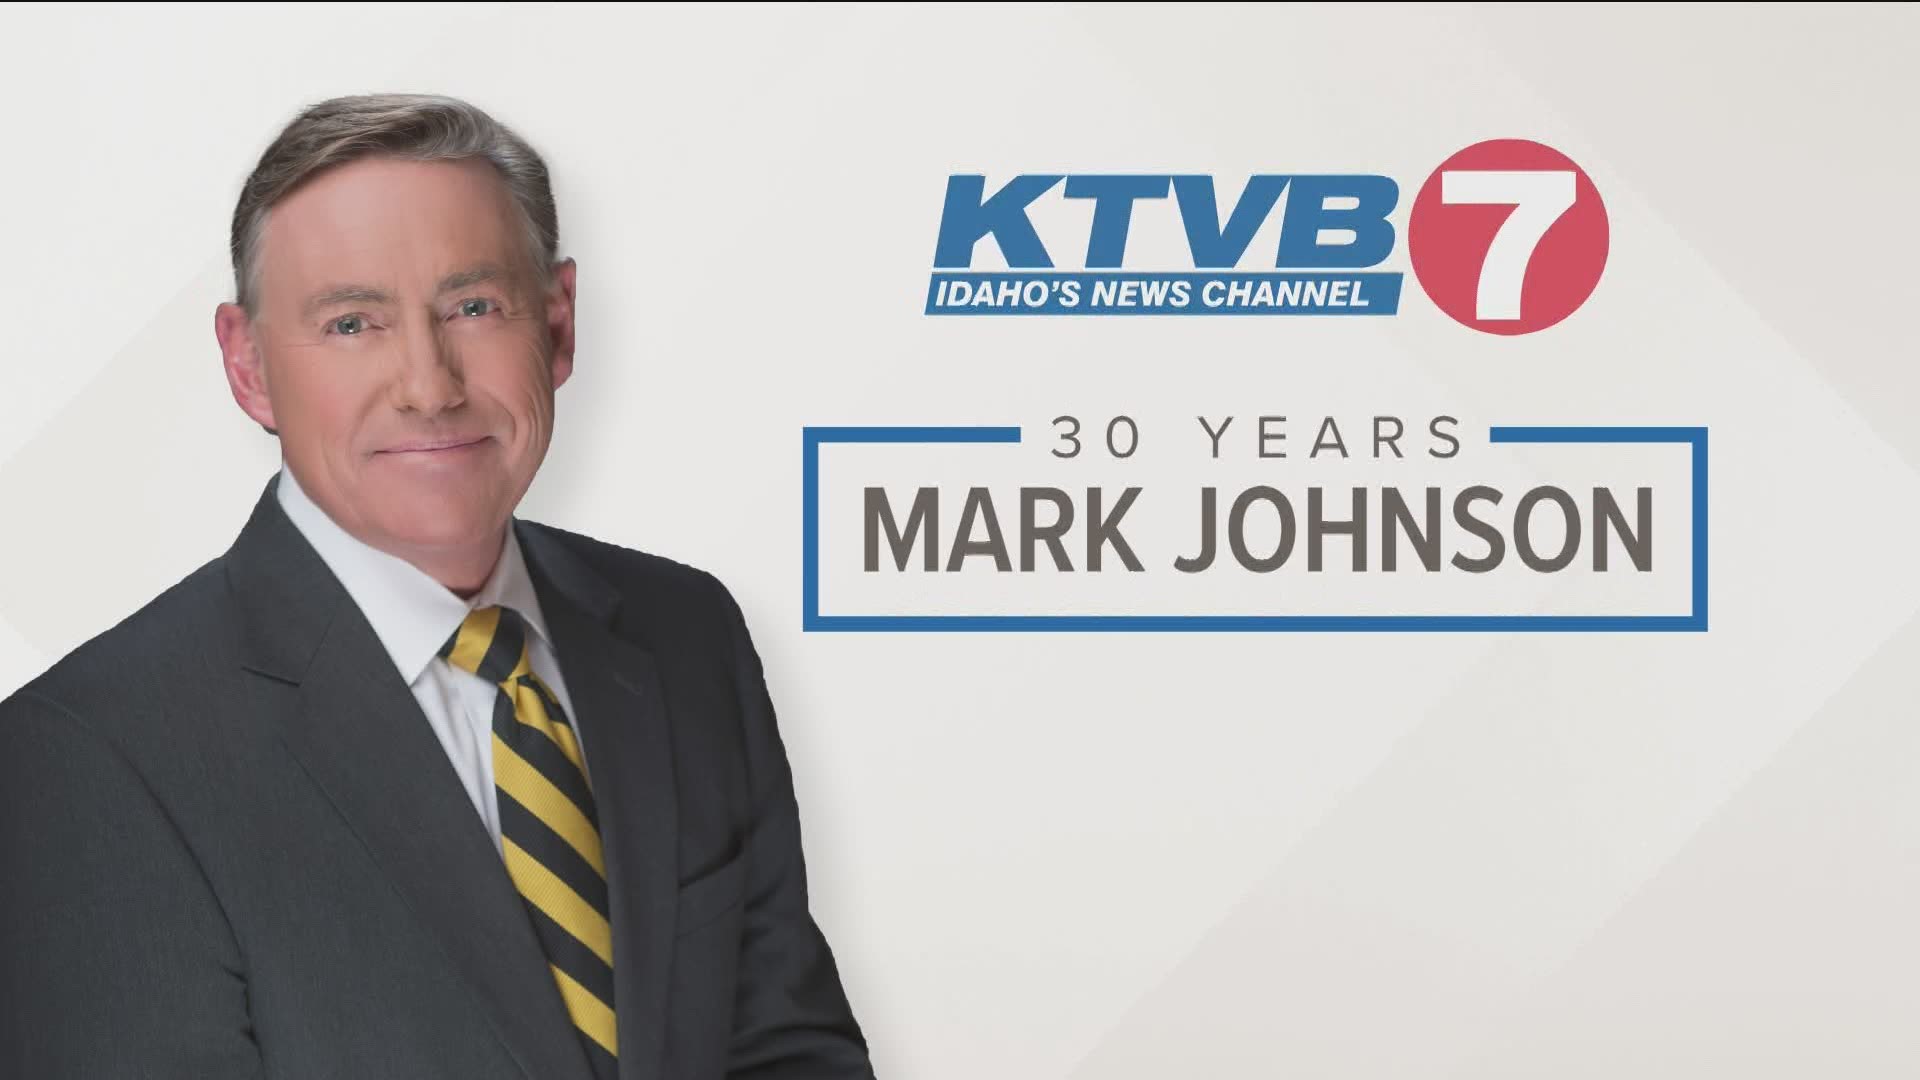 Join us in taking a look back at three decades of Mark Johnson at KTVB.